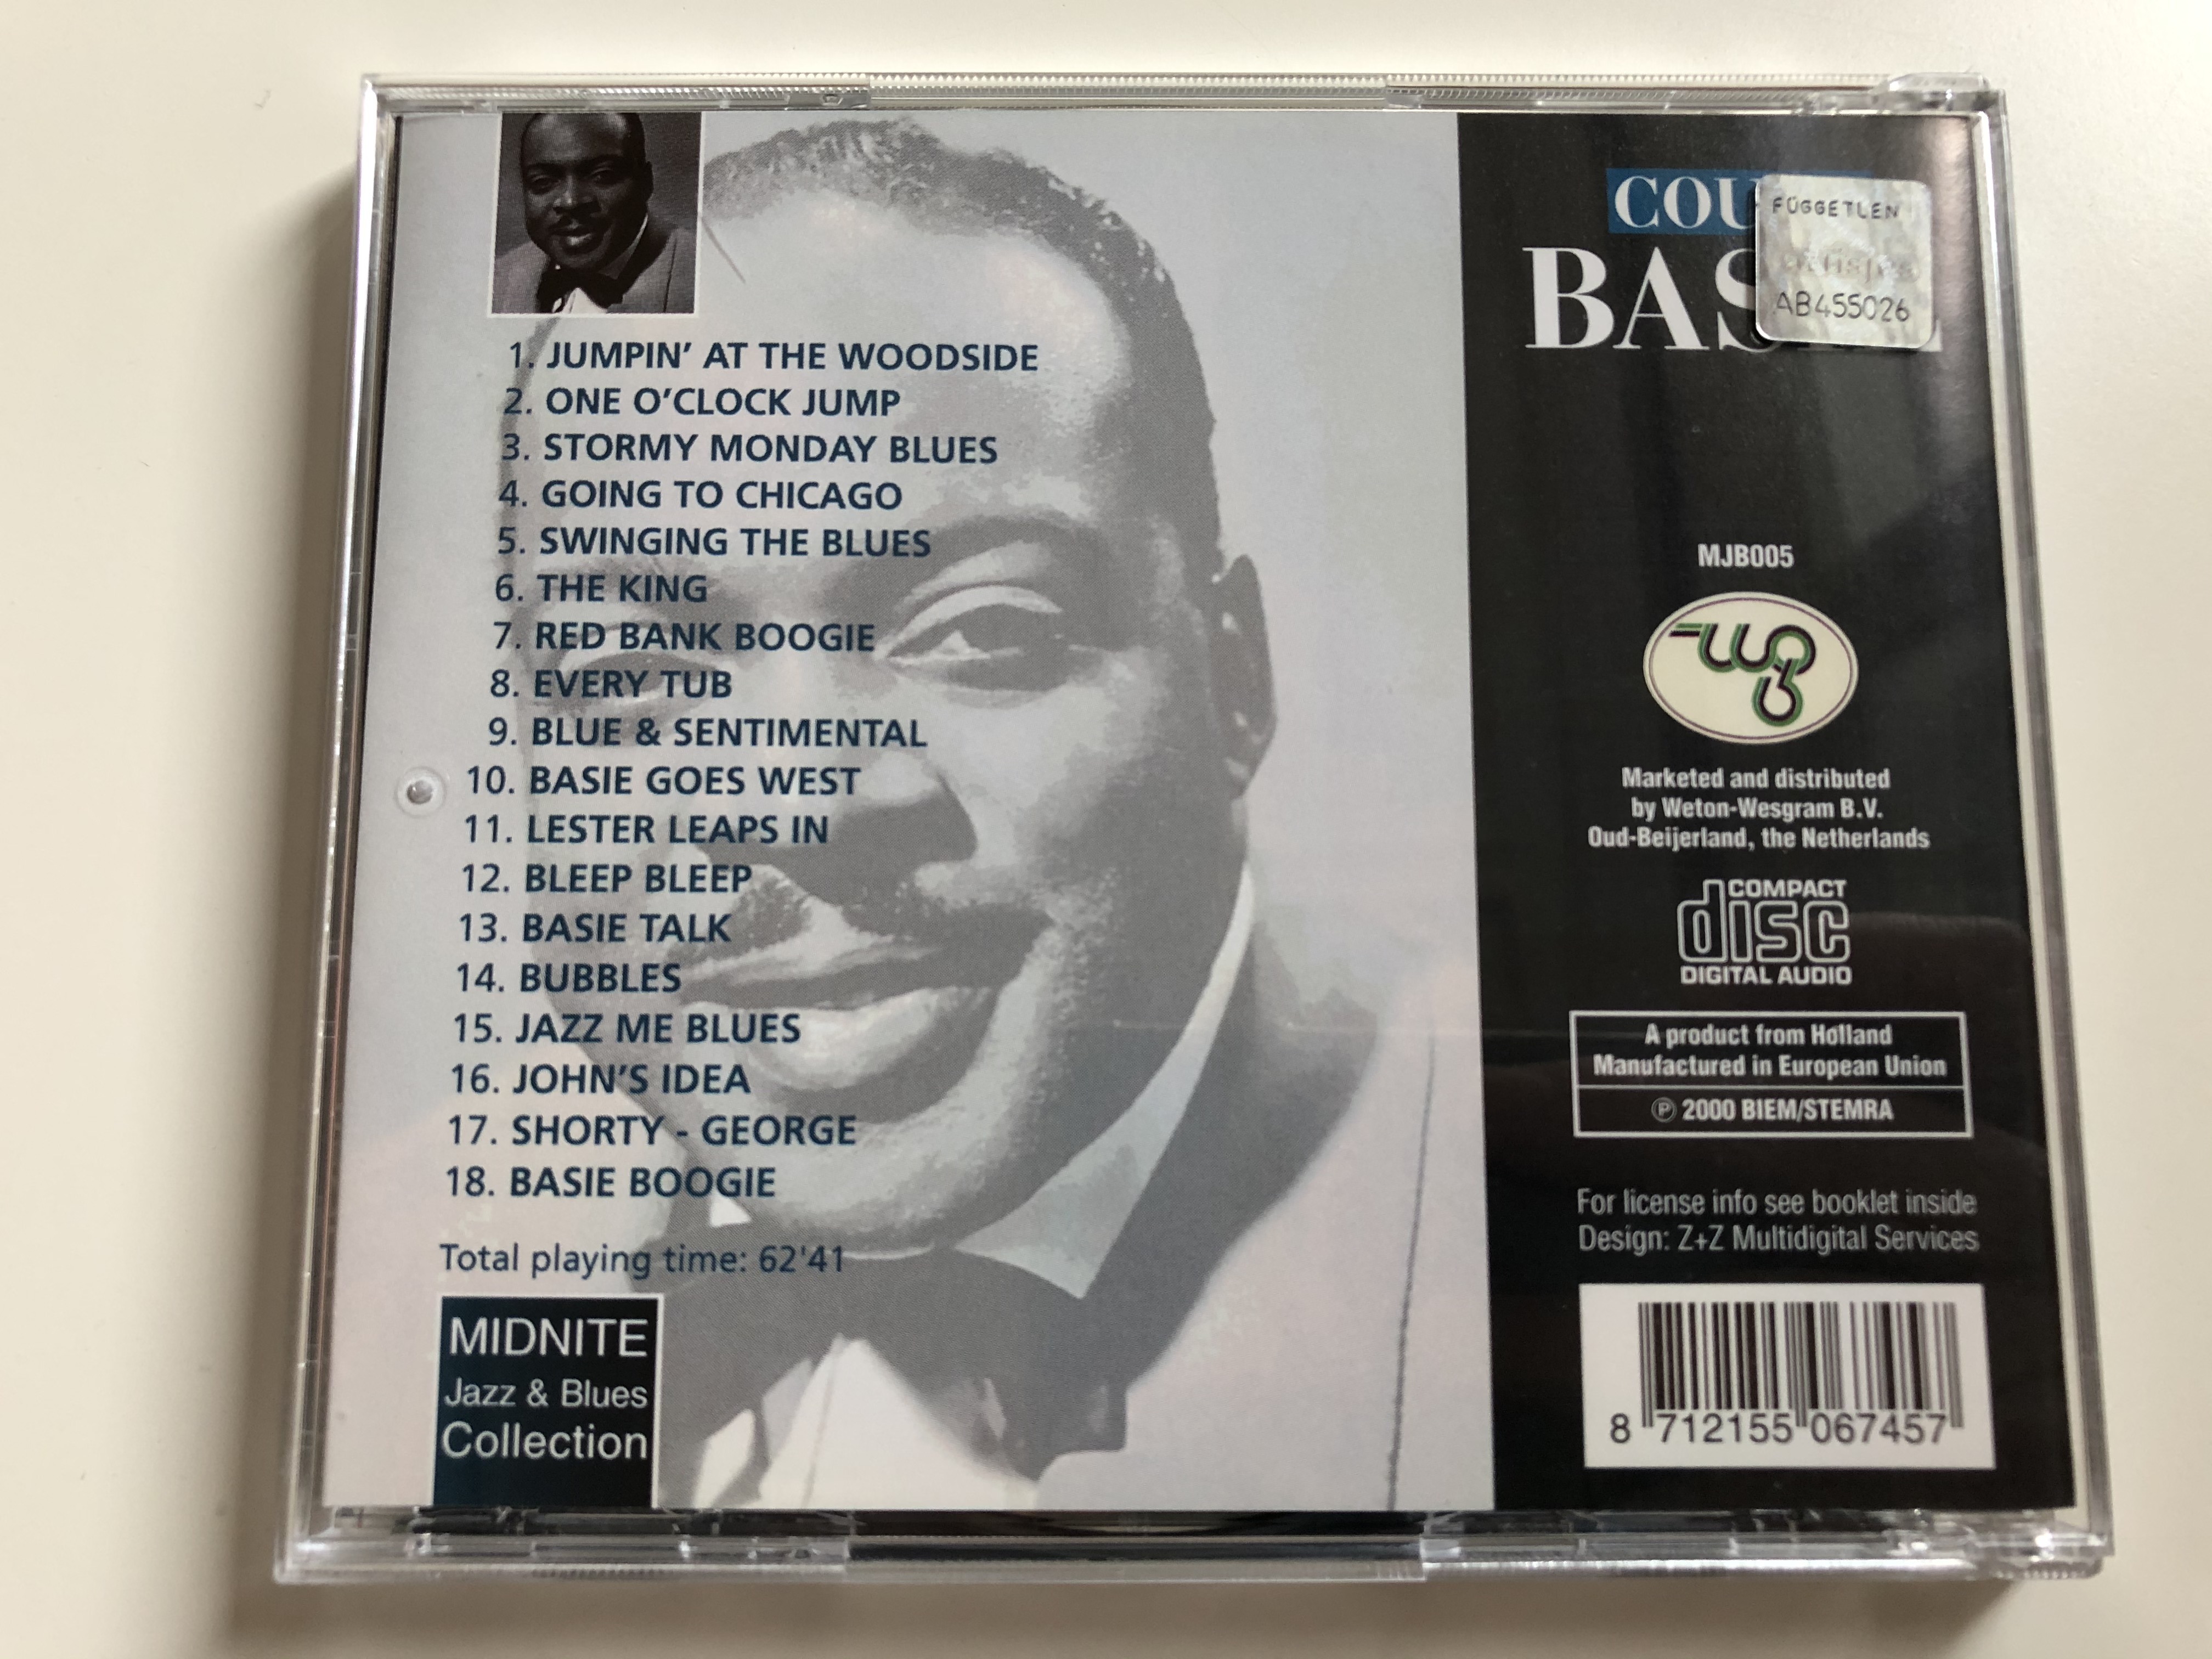 count-basie-famous-jazz-sessions-midnite-jazz-blues-collection-audio-cd-2000-mjb005-2-.jpg